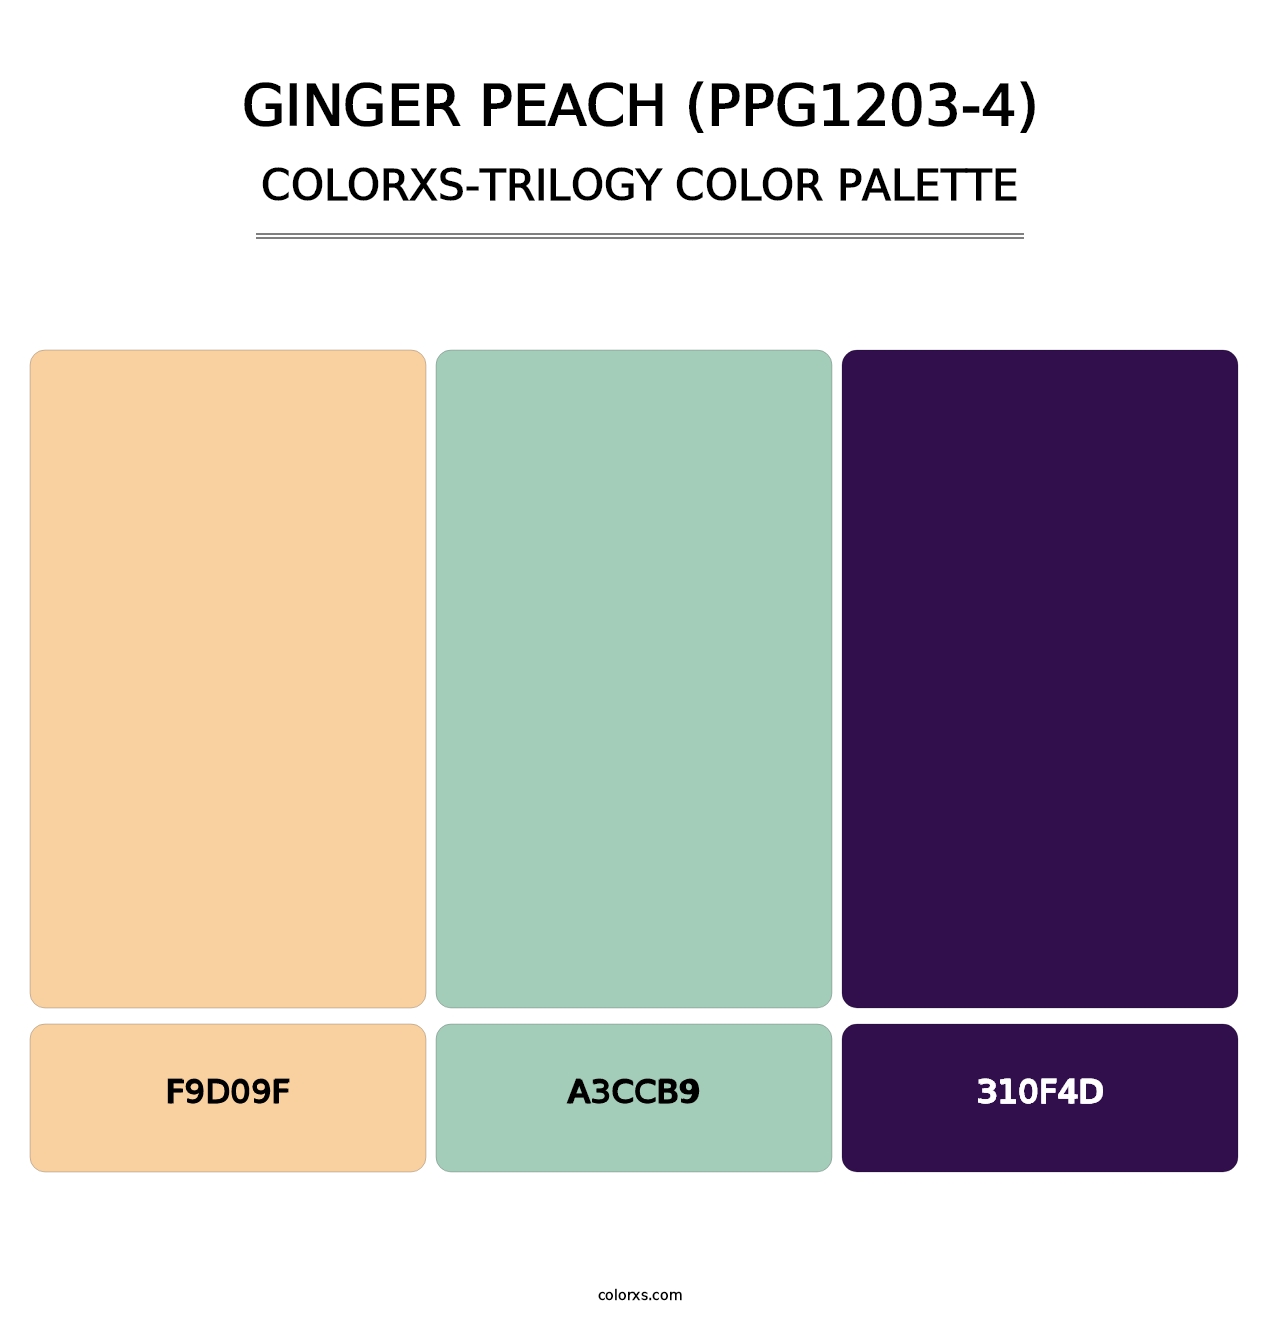 Ginger Peach (PPG1203-4) - Colorxs Trilogy Palette